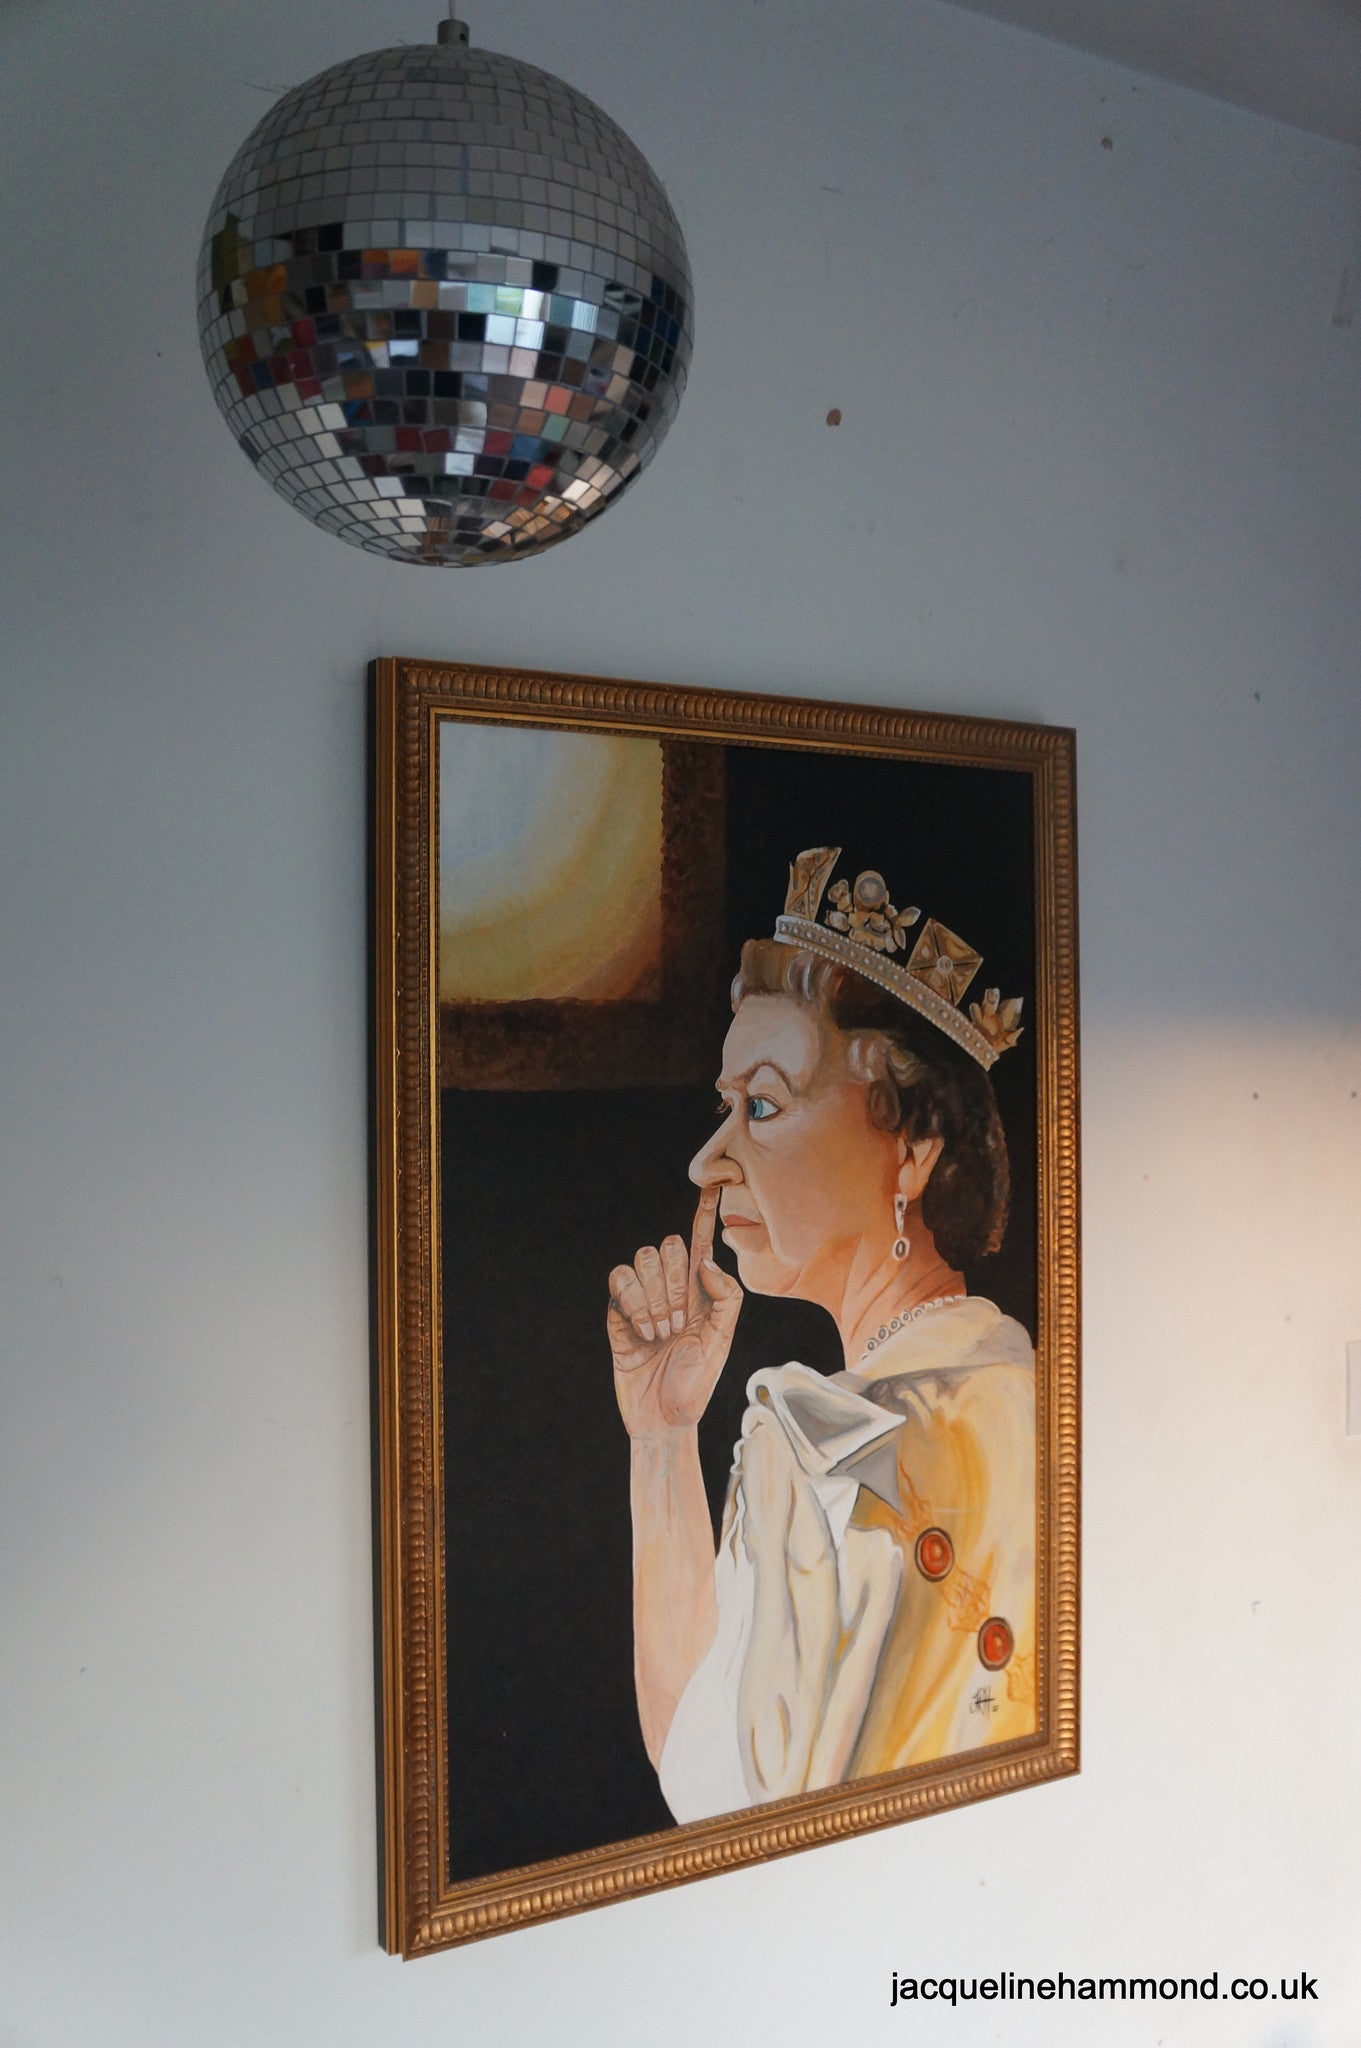 The Queen in a Moment of Privacy  Smart Deco Homeware Lighting and Art by Jacqueline hammond